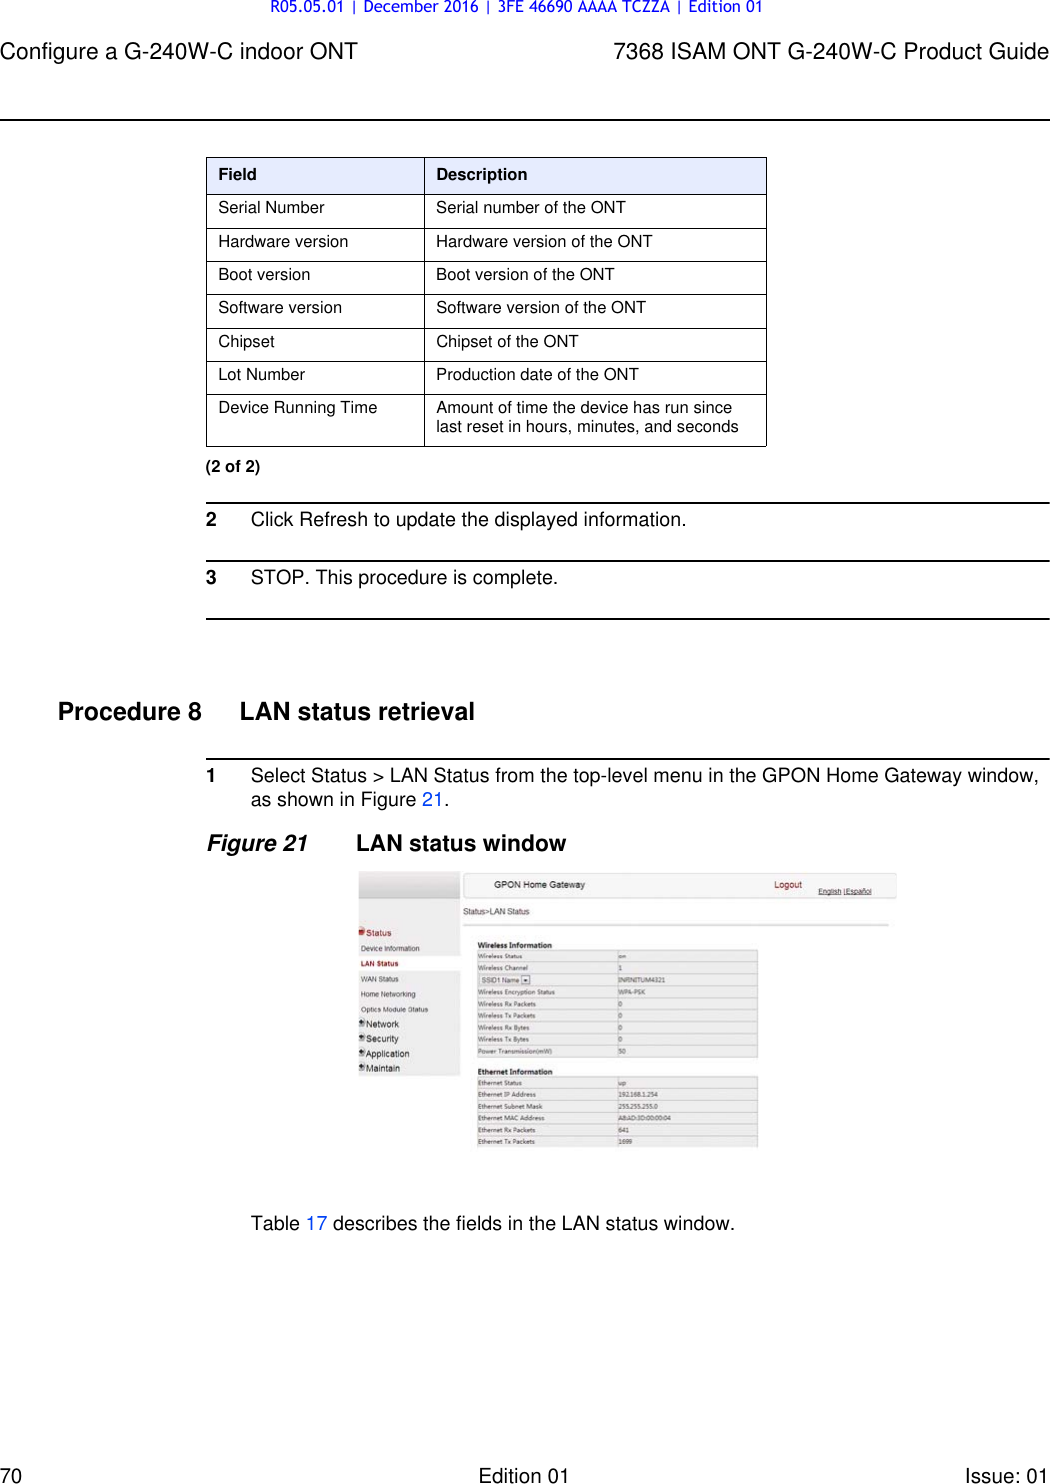 Page 70 of Nokia Bell G240W-C GPON ONU User Manual 7368 ISAM ONT G 240W B Product Guide